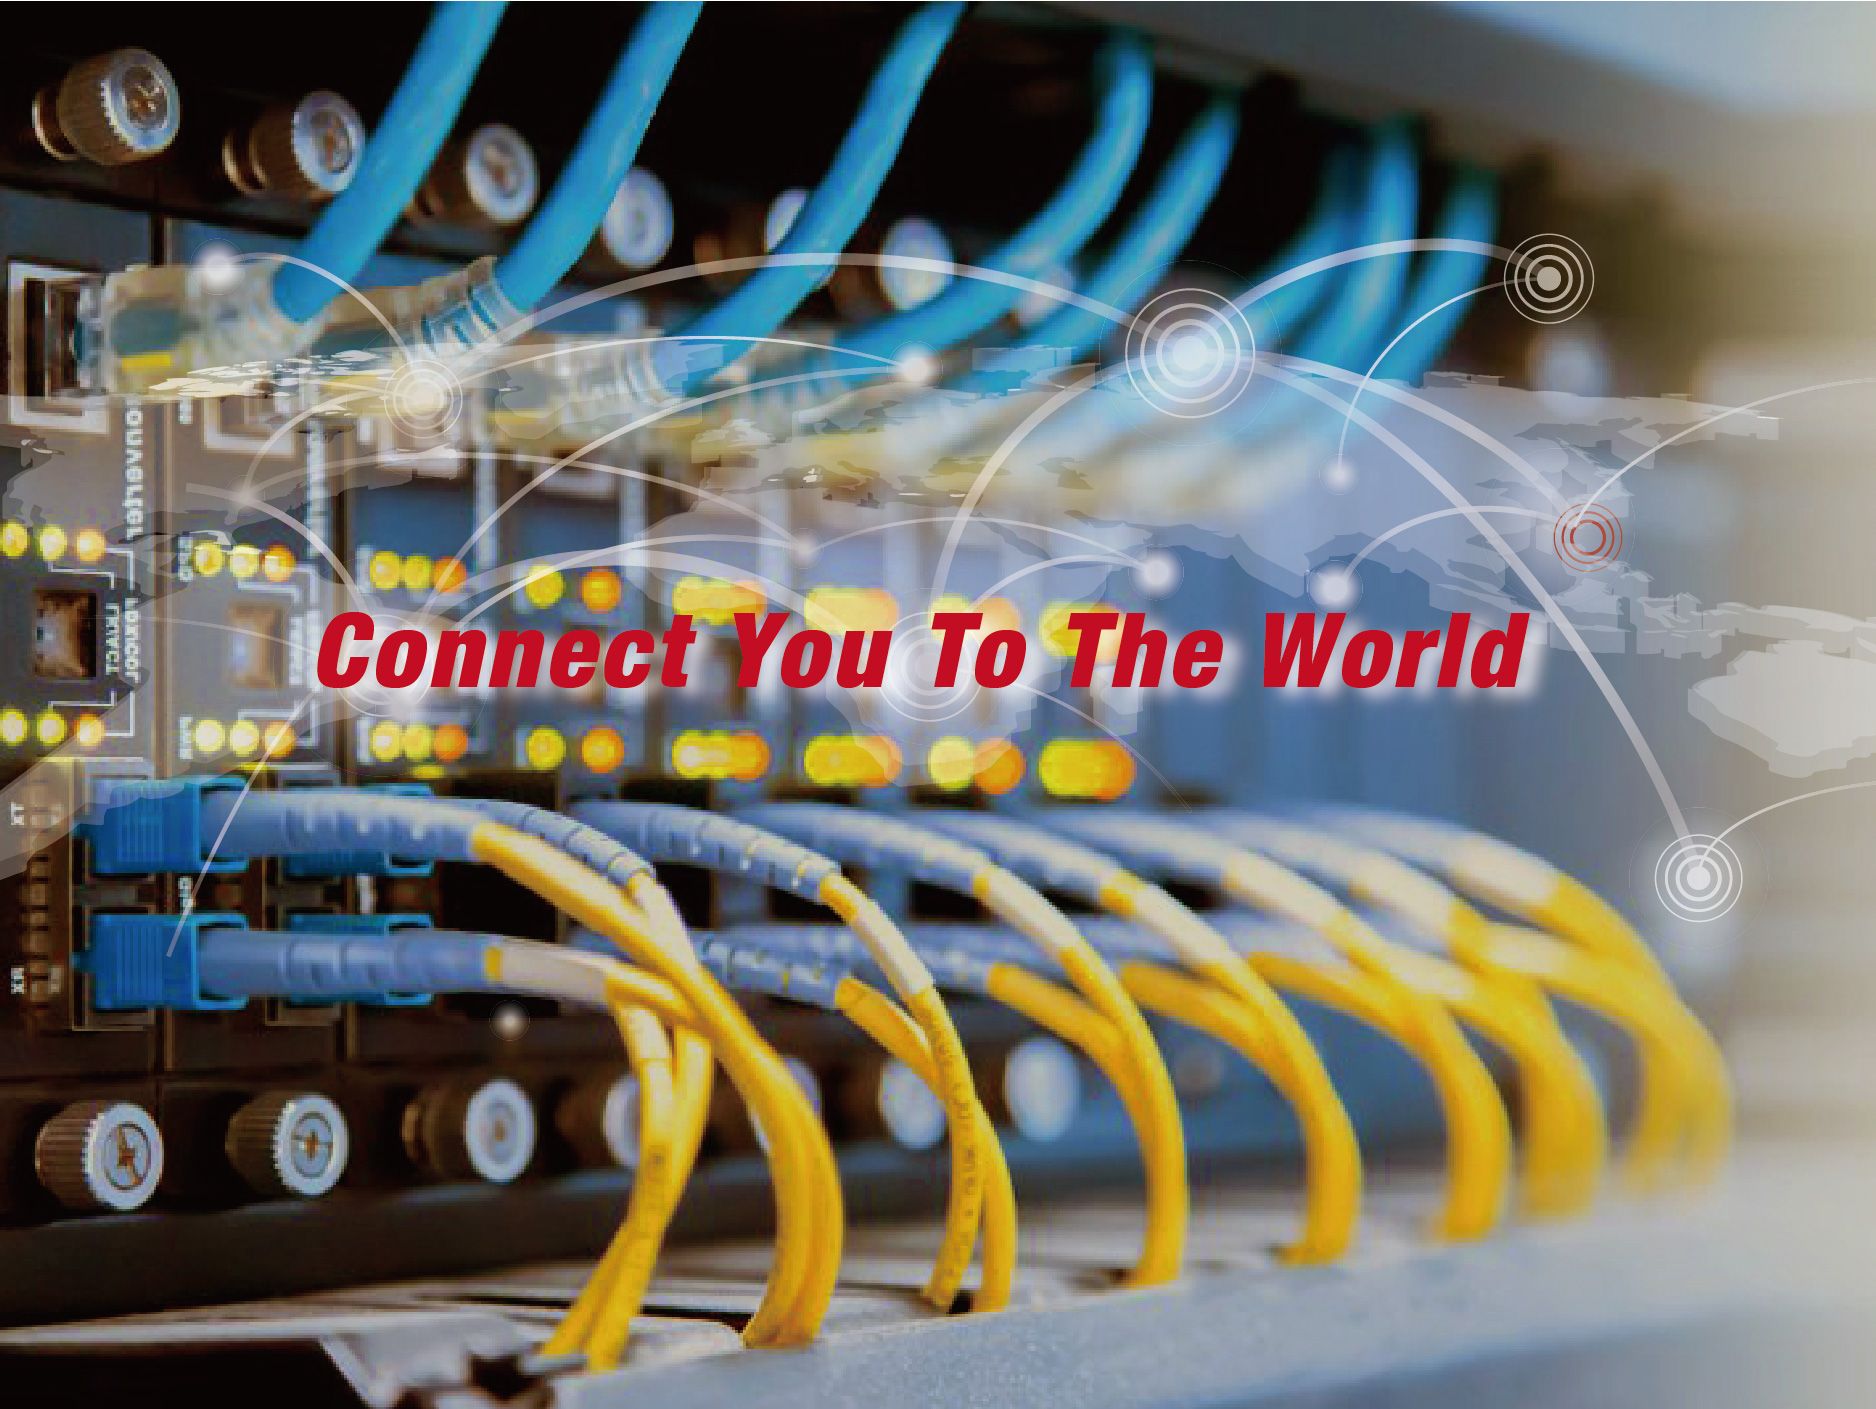 CRXCONEC reliable OEM structured cabling manufacturer